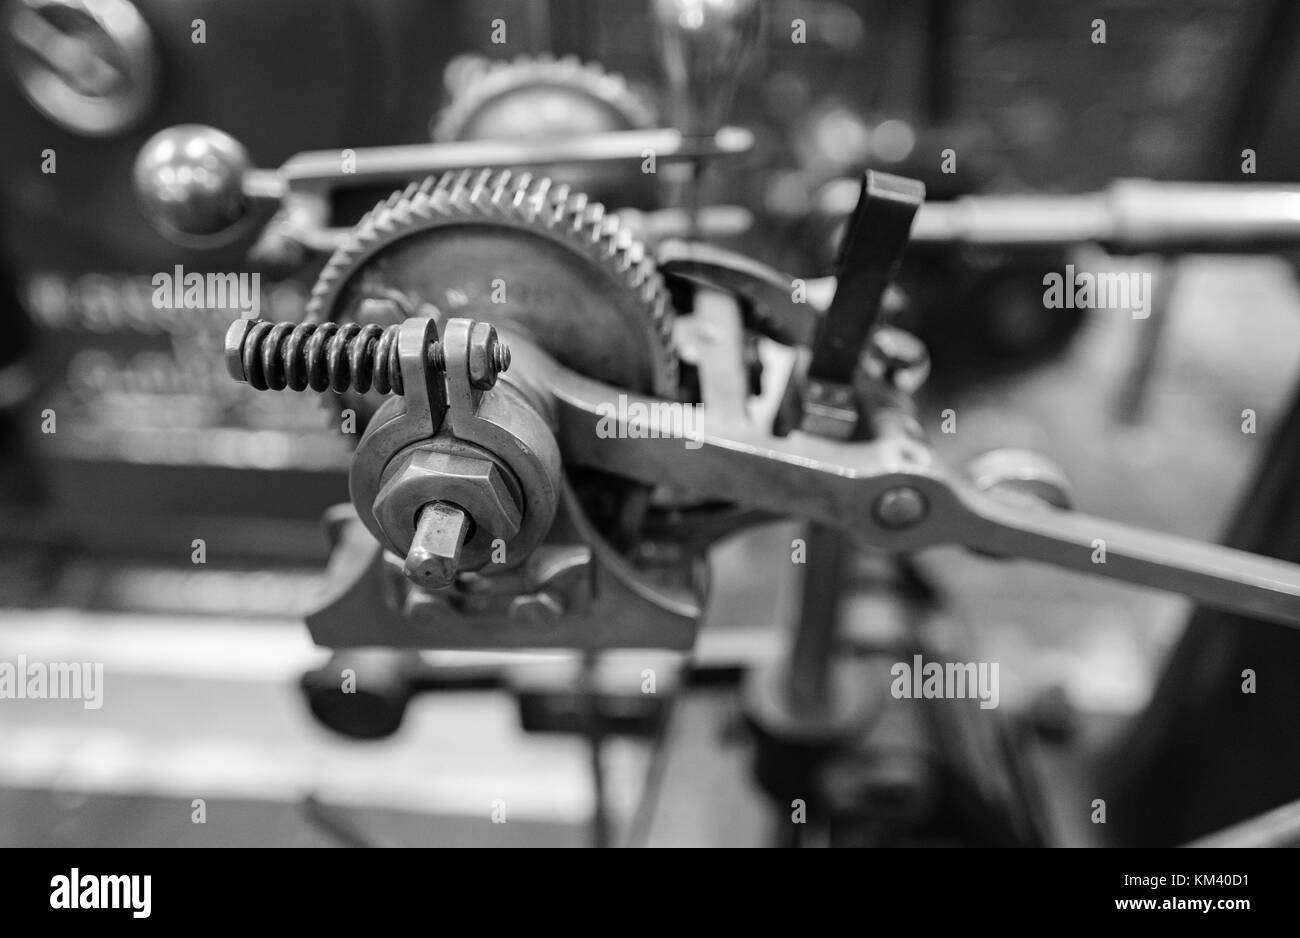 Old 20th century machinery showing gears, bolts, nuts in black and white Stock Photo